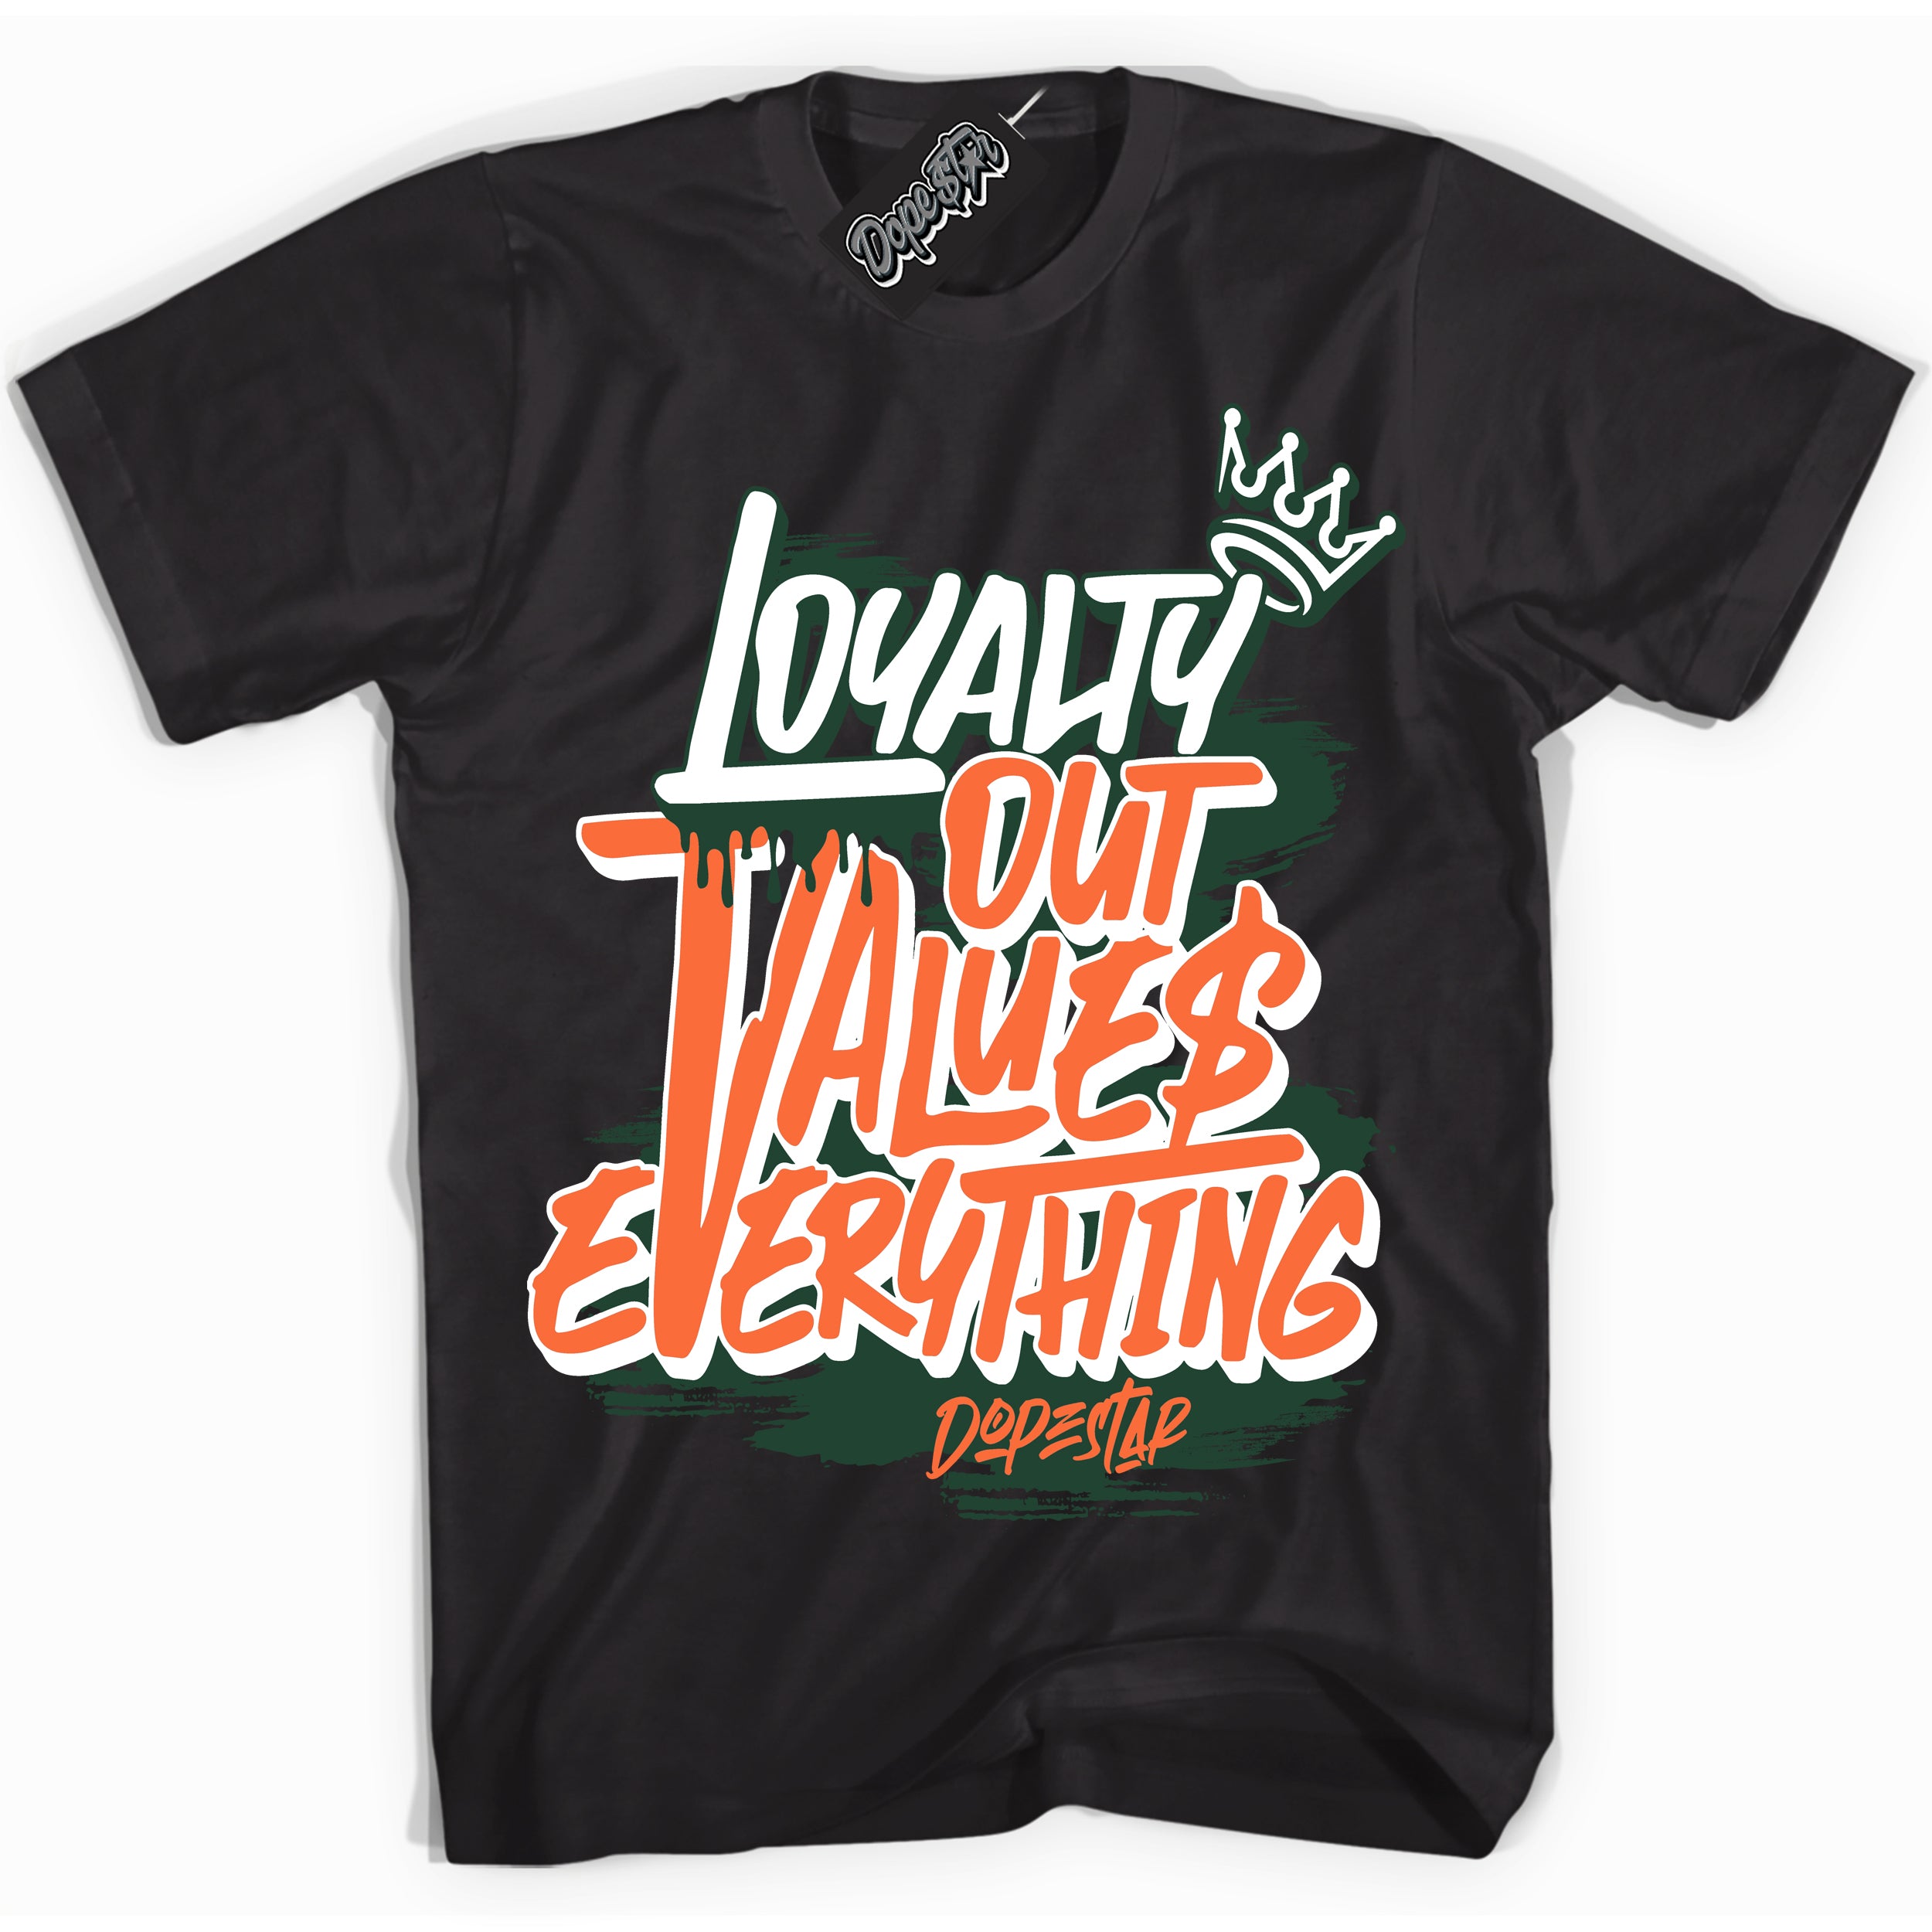 Cool Black Shirt with “ Loyalty Out Values Everything” design that perfectly matches Miami Hurricanes Sneakers.